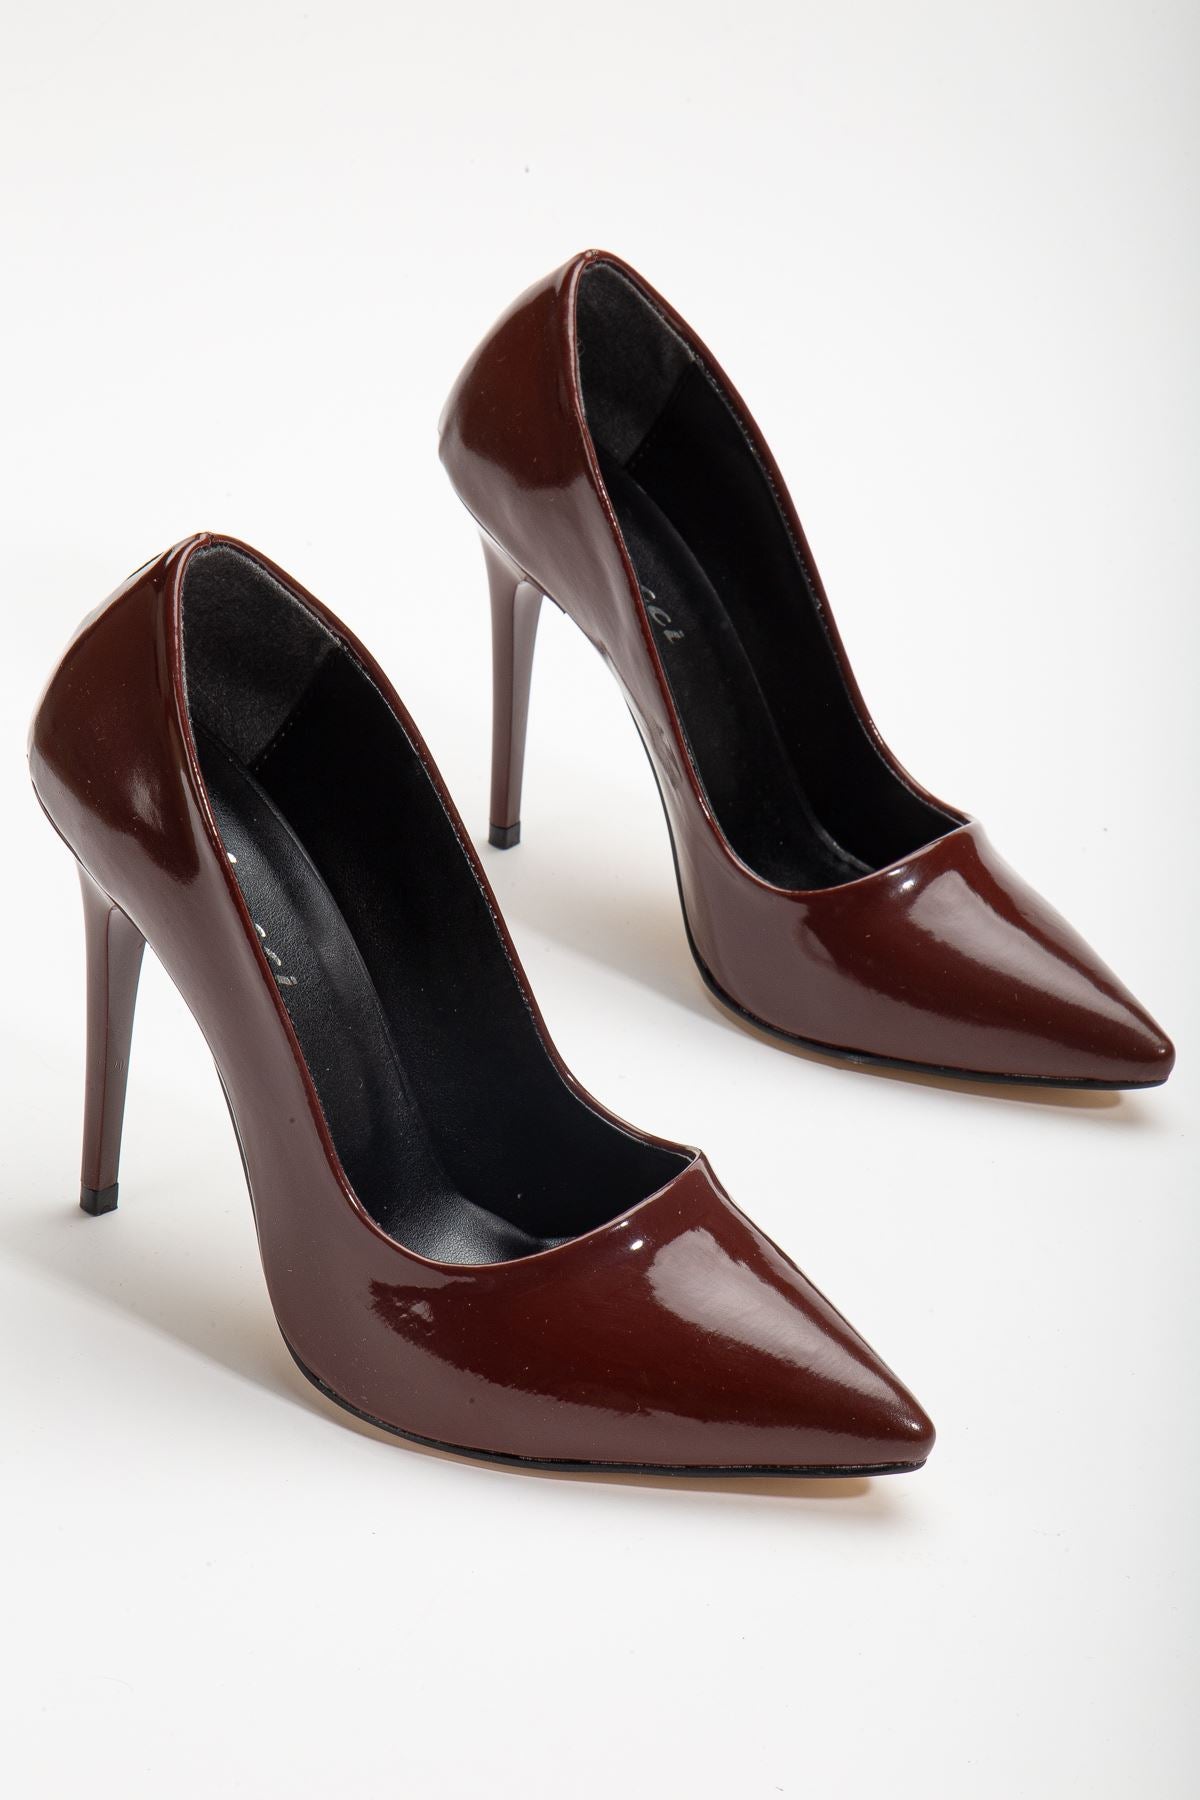 River Burgundy Patent Leather Thin Heeled Women's Evening Dress Shoes - STREETMODE™